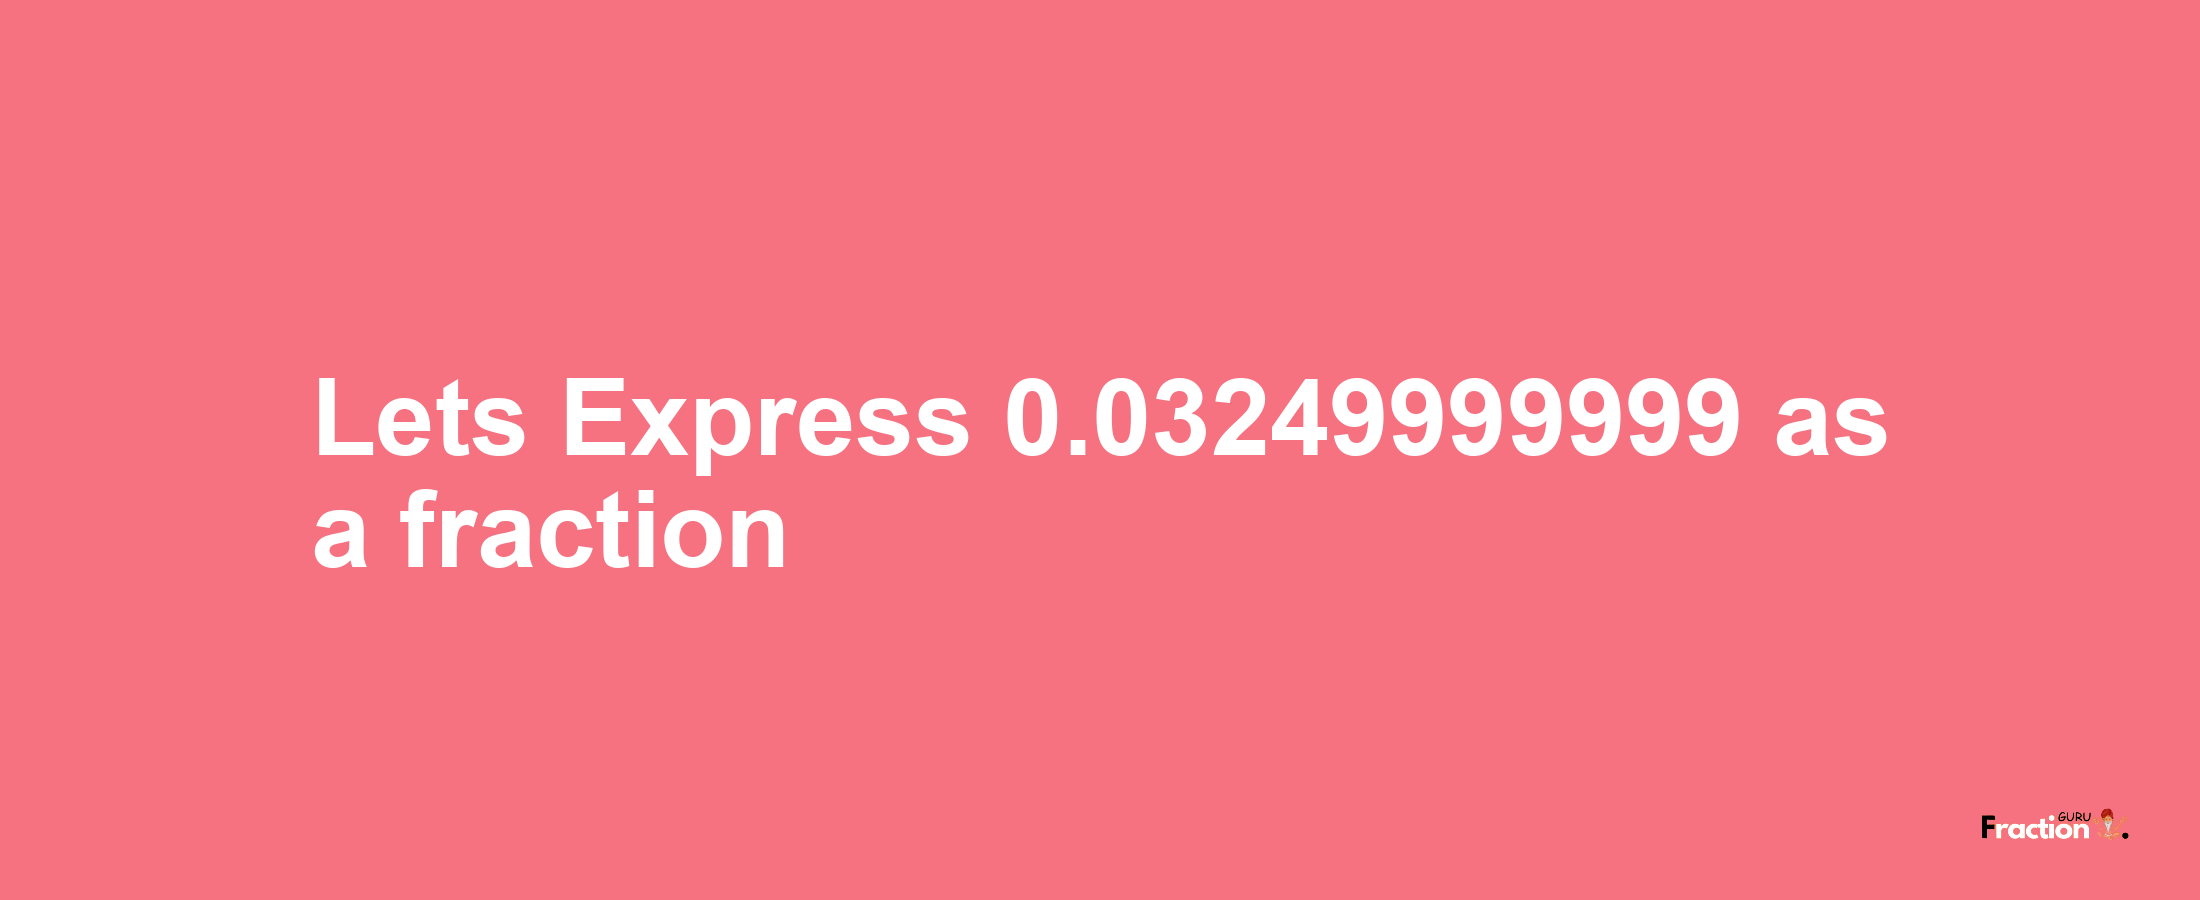 Lets Express 0.03249999999 as afraction